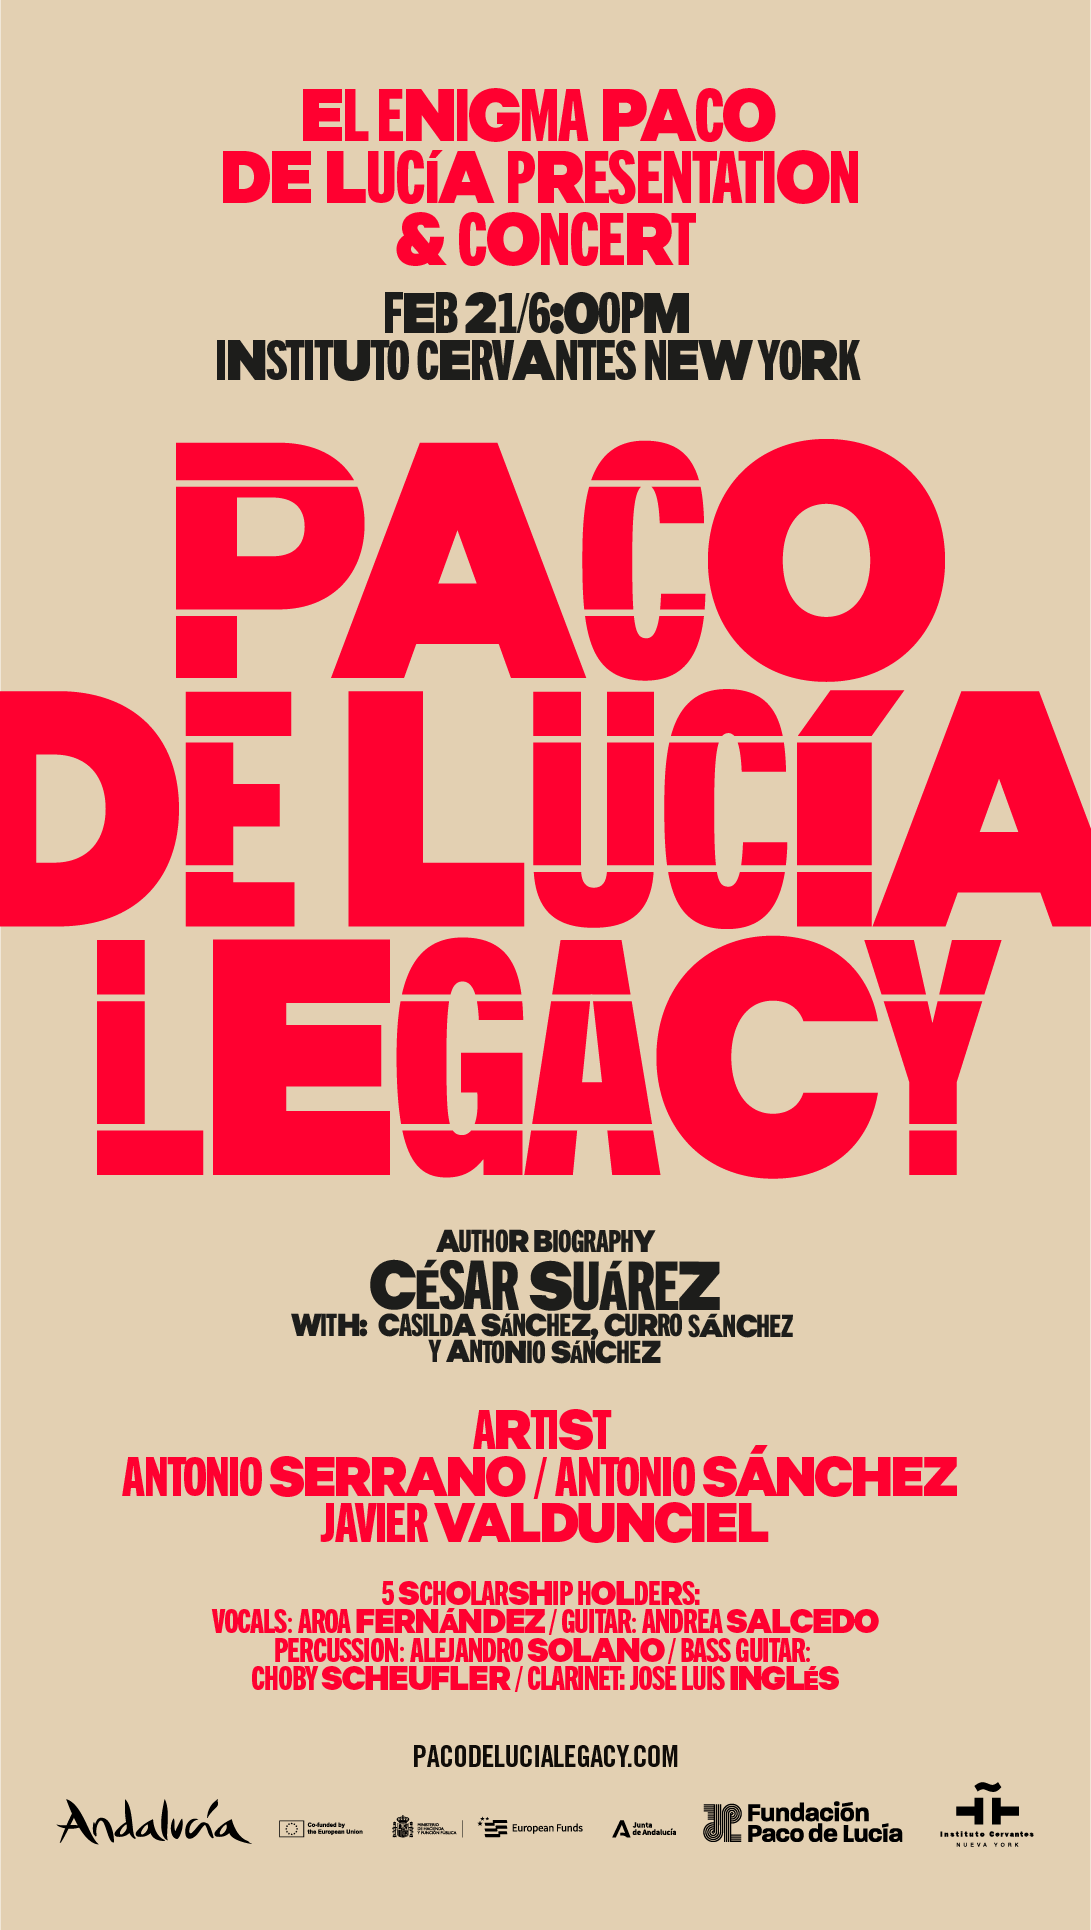 Paco de Lucía Biography Presentation  and Concert SOLD OUT